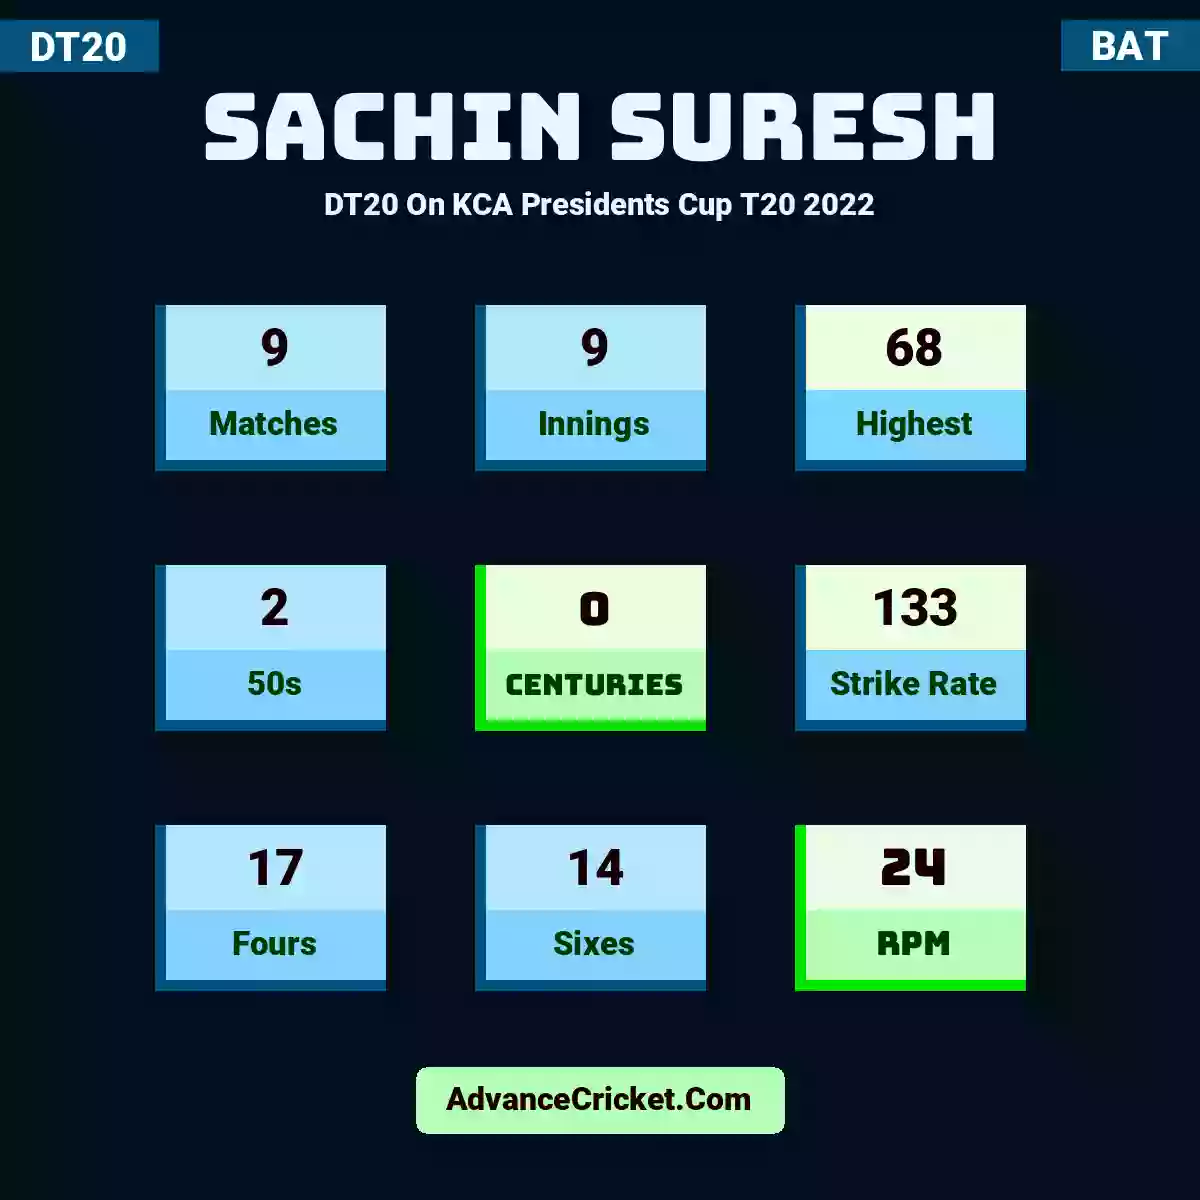 Sachin Suresh DT20  On KCA Presidents Cup T20 2022, Sachin Suresh played 9 matches, scored 68 runs as highest, 2 half-centuries, and 0 centuries, with a strike rate of 133. S.Suresh hit 17 fours and 14 sixes, with an RPM of 24.